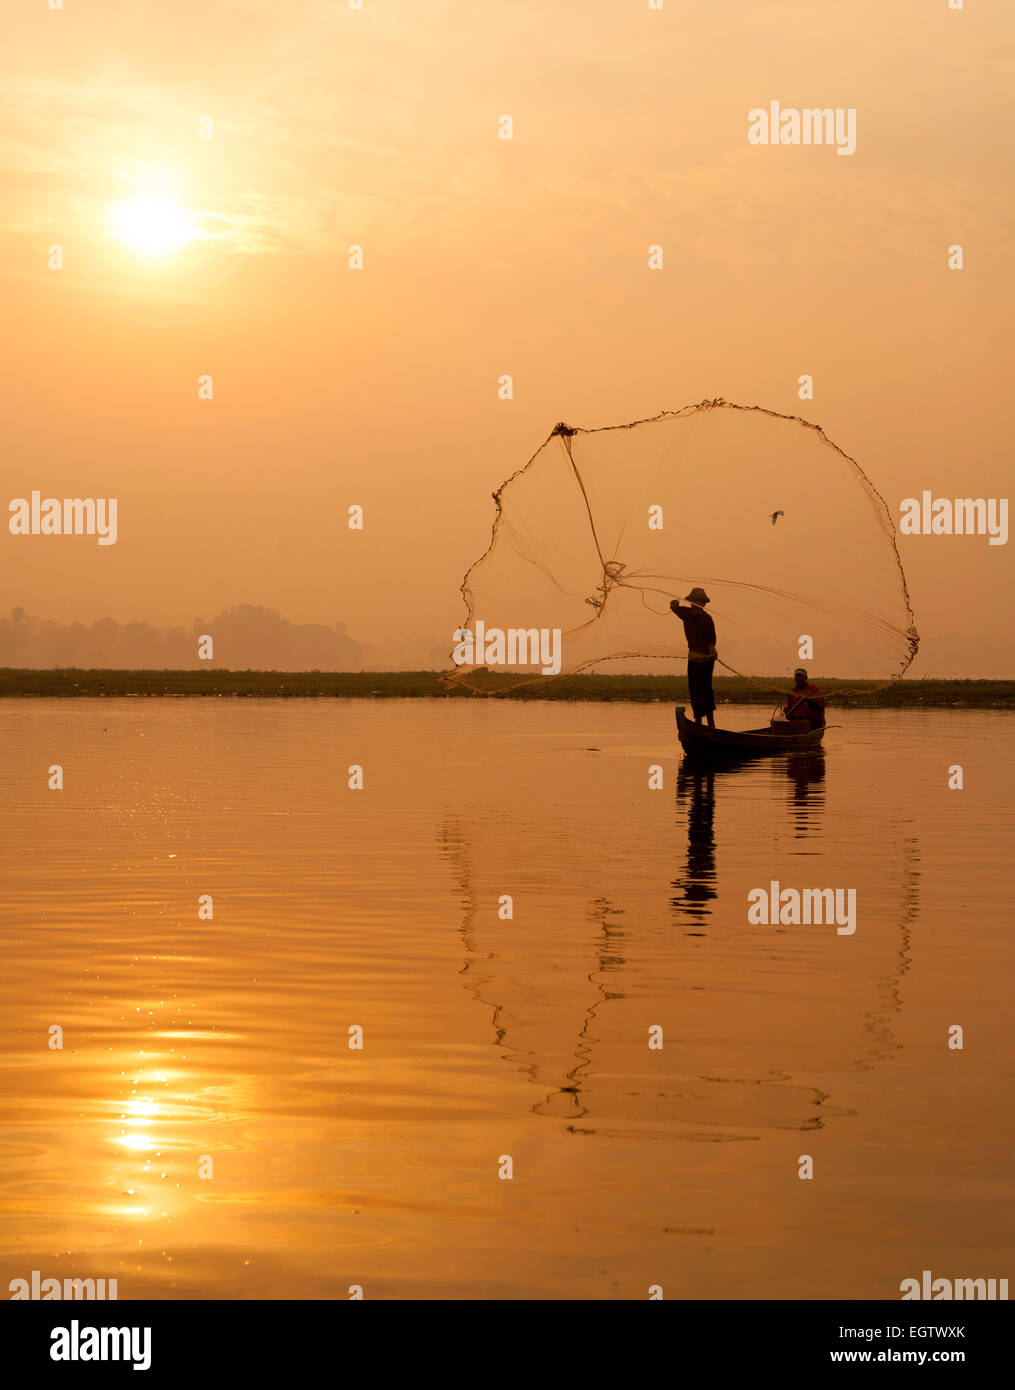 Children Boy And Girl Walking Catching Fish, Fisherman Fishing Nets On Boat  At Lake, River Sunset Thailand Stock Photo, Picture and Royalty Free Image.  Image 83011038.